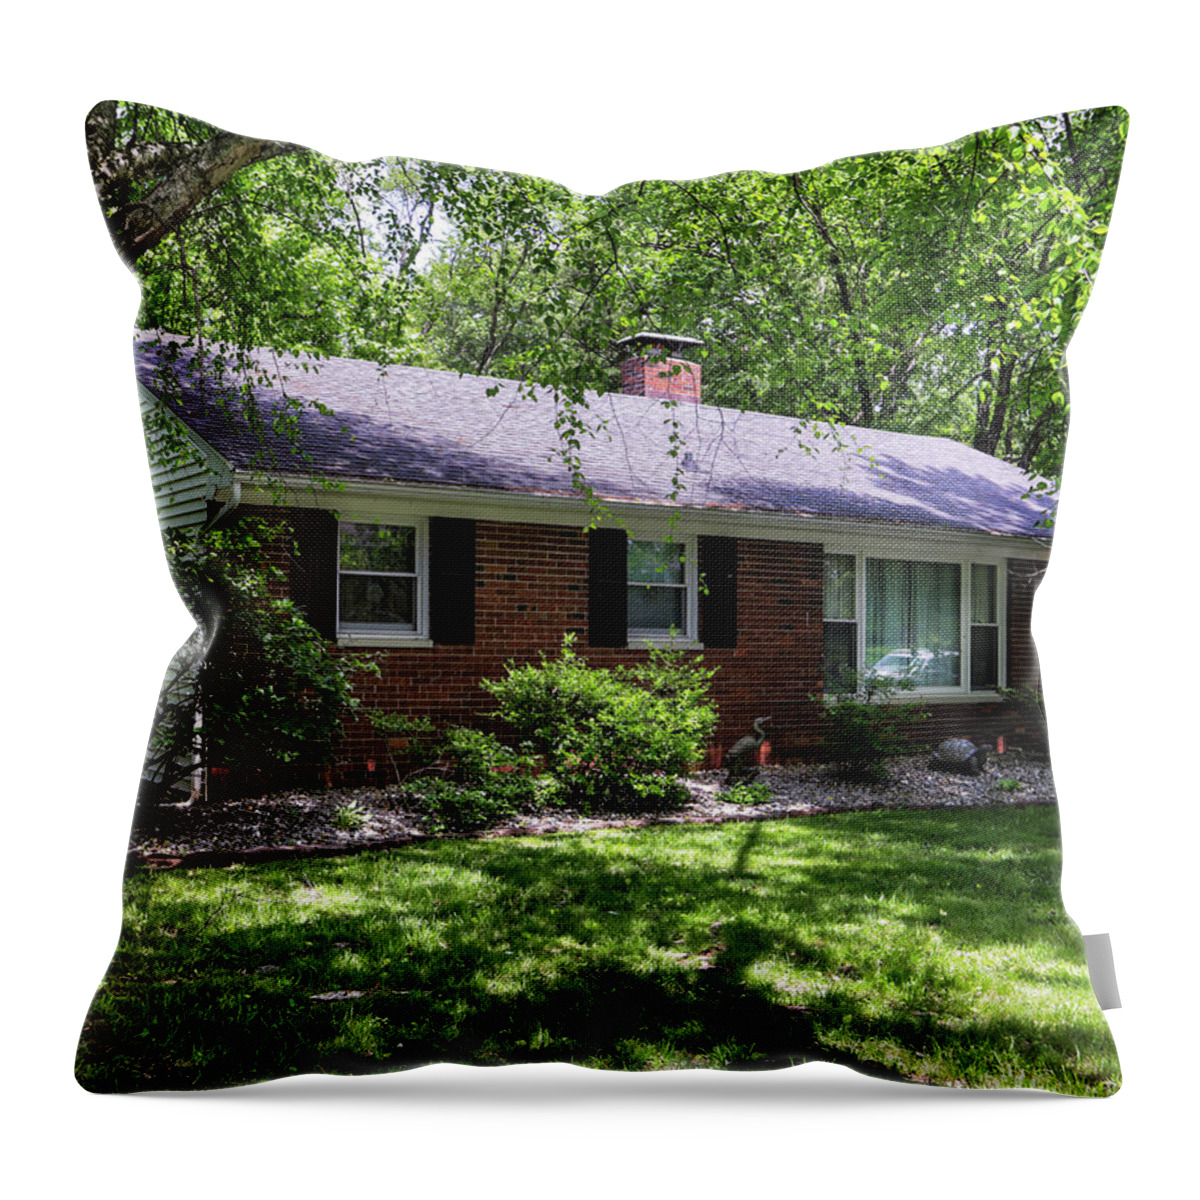 Real Estate Photography Throw Pillow featuring the photograph 908 Front on Shady Lane by Jeff Kurtz